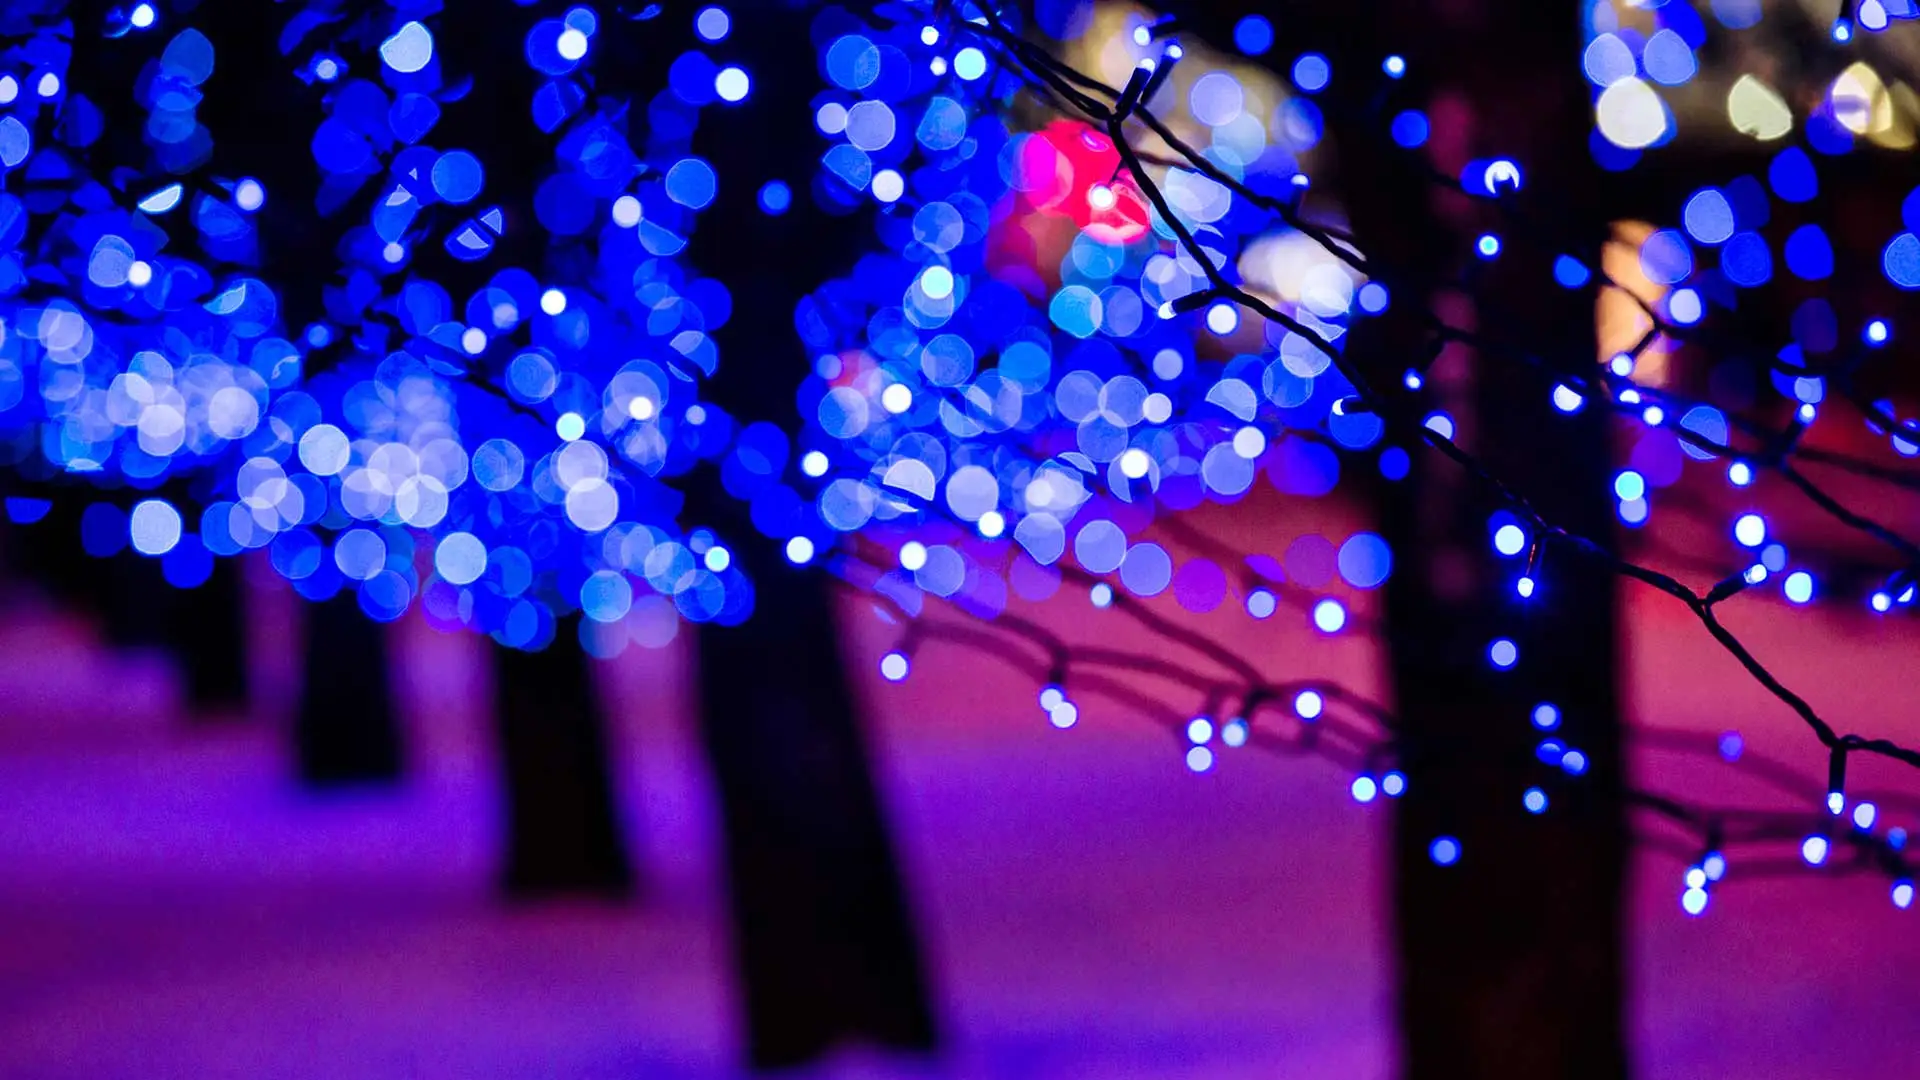 Blue holiday lights decorating trees in Louisville, Kentucky.